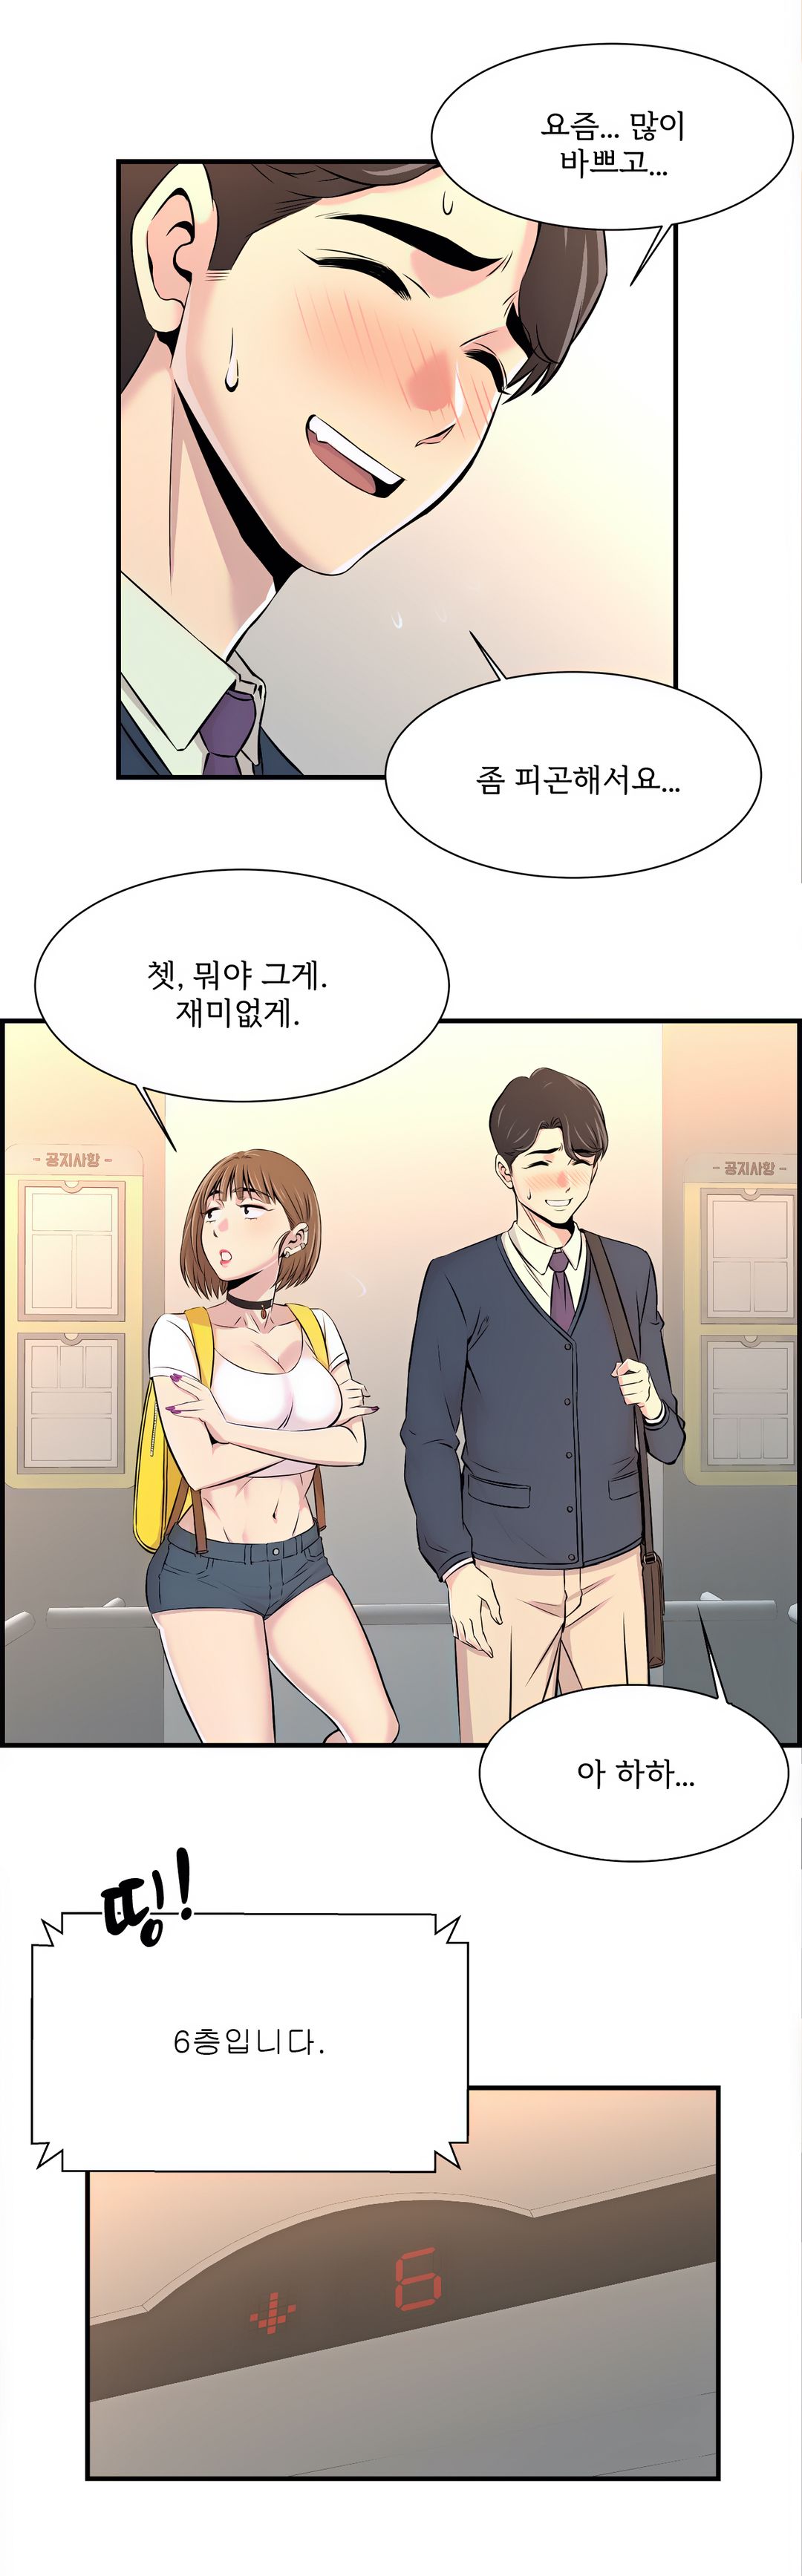 Cram School Scandal Raw - Chapter 13 Page 5